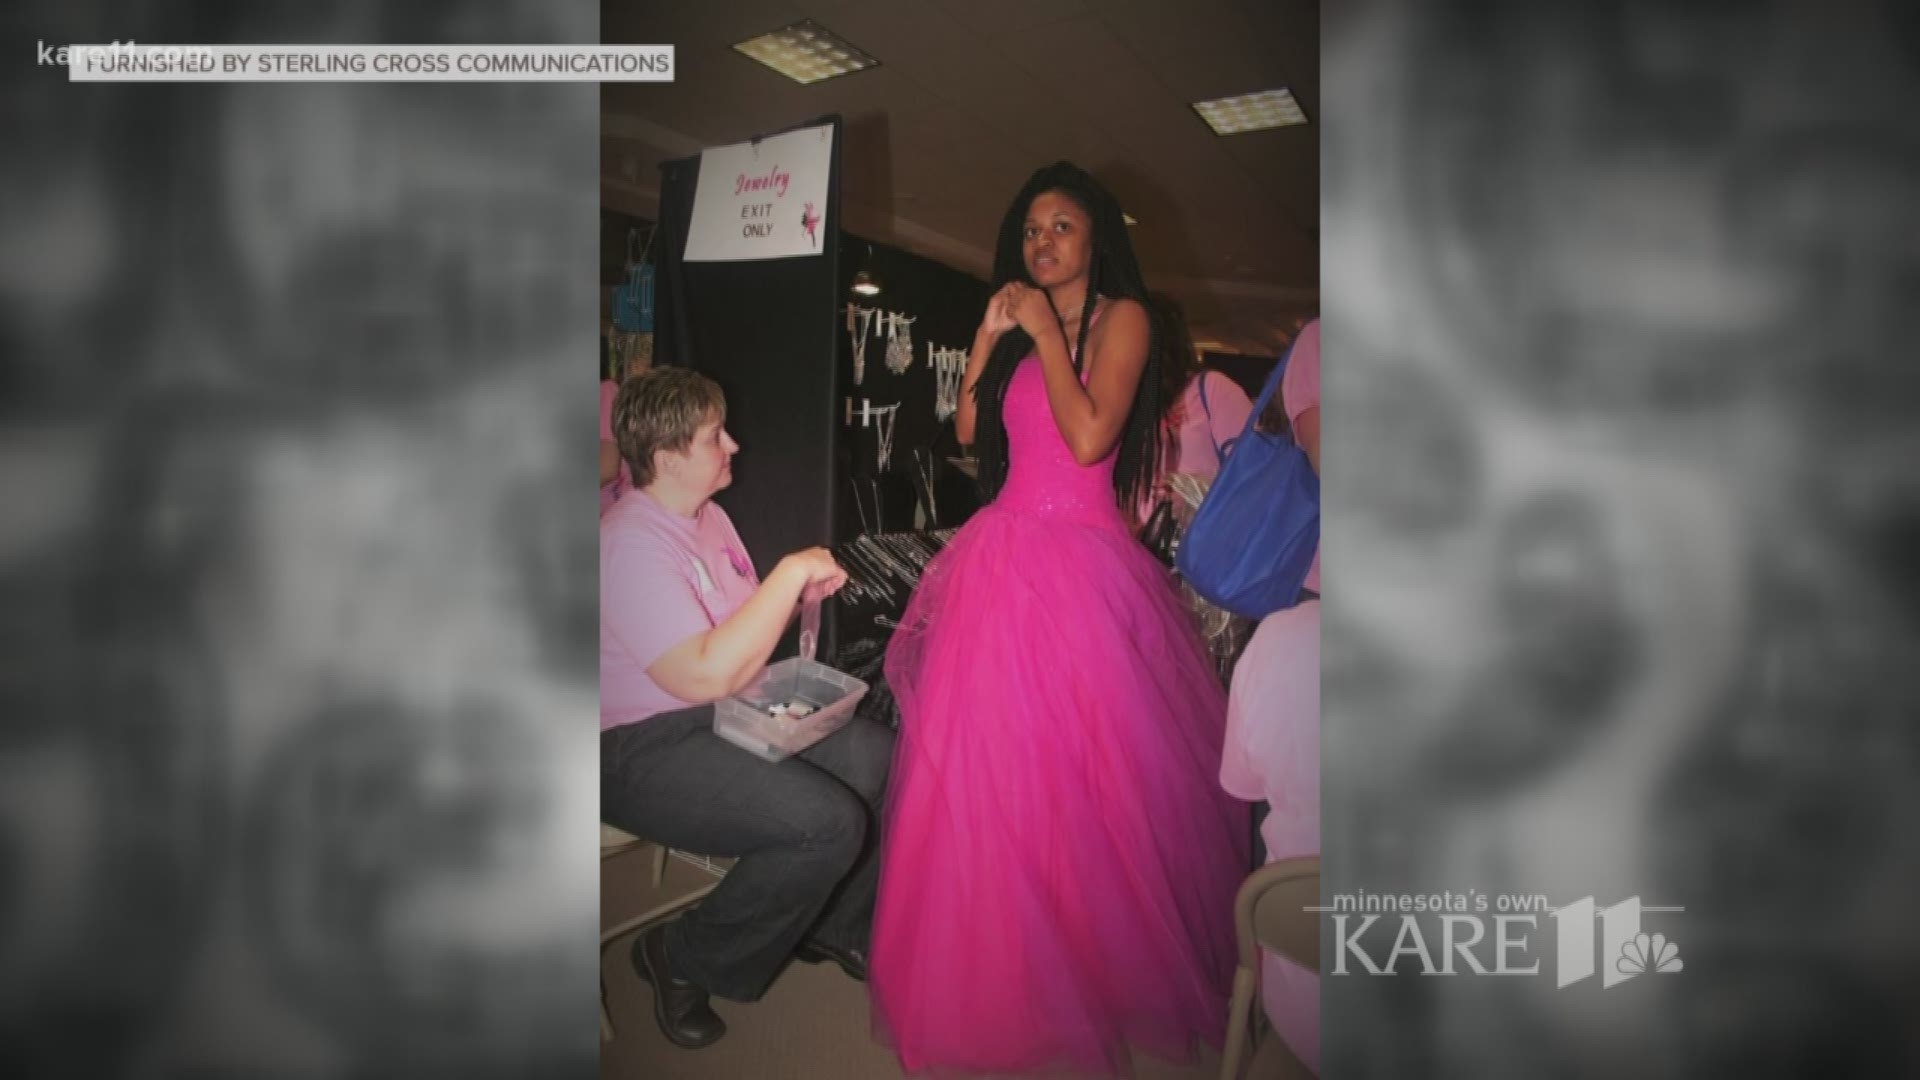 Operation Glass Slipper and Mobile Menders are teaming up to help make hundreds of high school girls prom dreams come true. http://kare11.tv/2tmGYvU